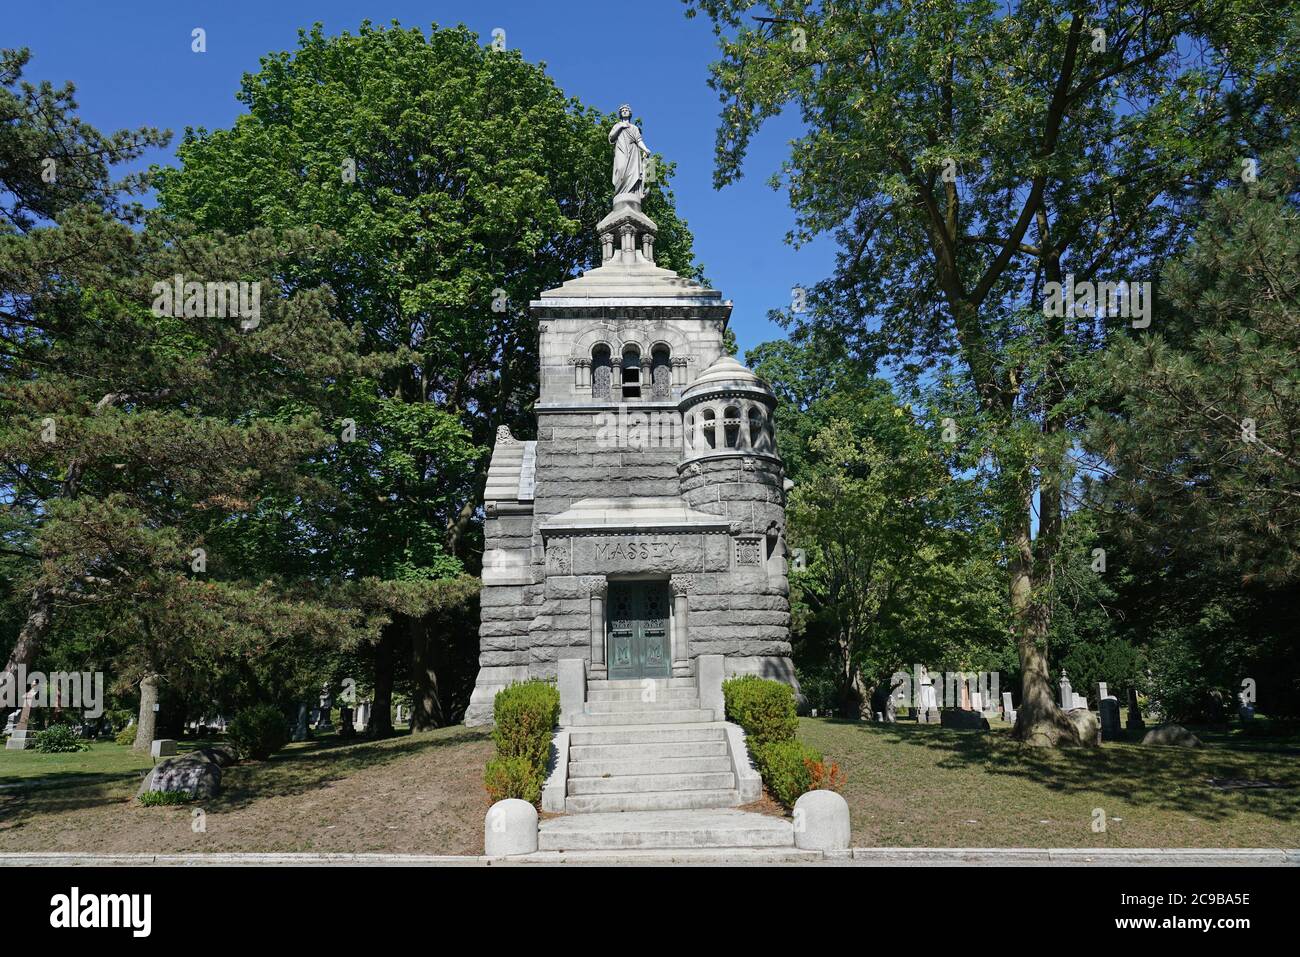 Toronto, Canada - July 24, 2020:  Mount Pleasant Cemetery is a huge park-like area in central Toronto with funeral monuments of historical interest. Stock Photo